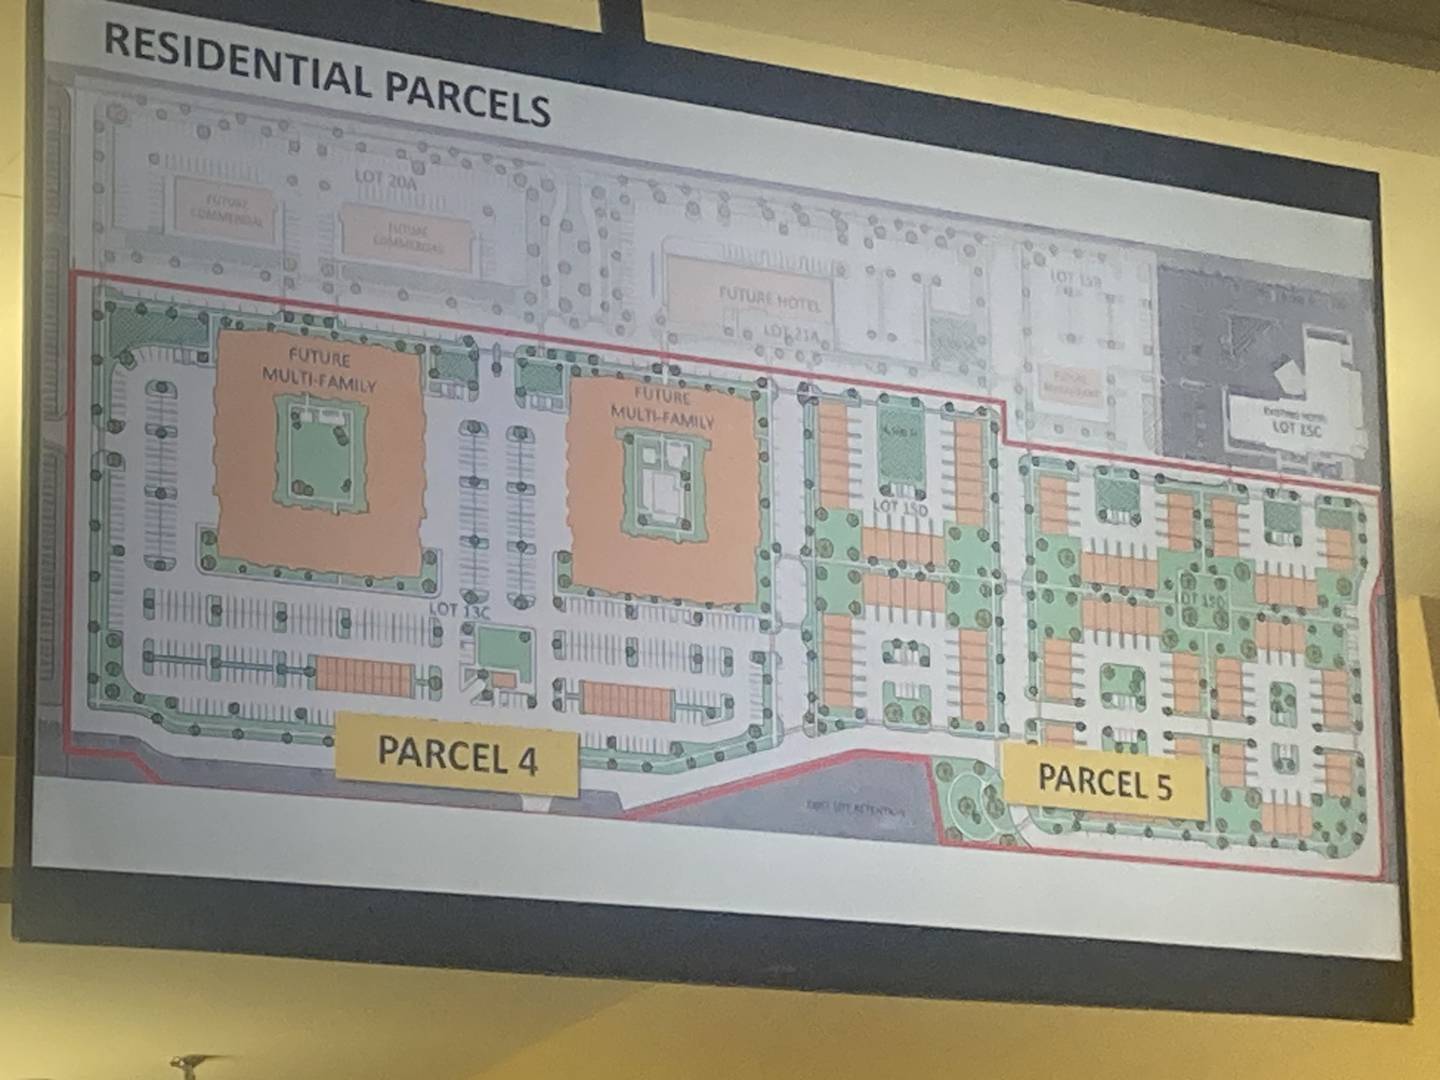 Layout of the proposed residential property in the Lockport Square development in orange. The existing Holiday Inn Express is visible in the top right corner.